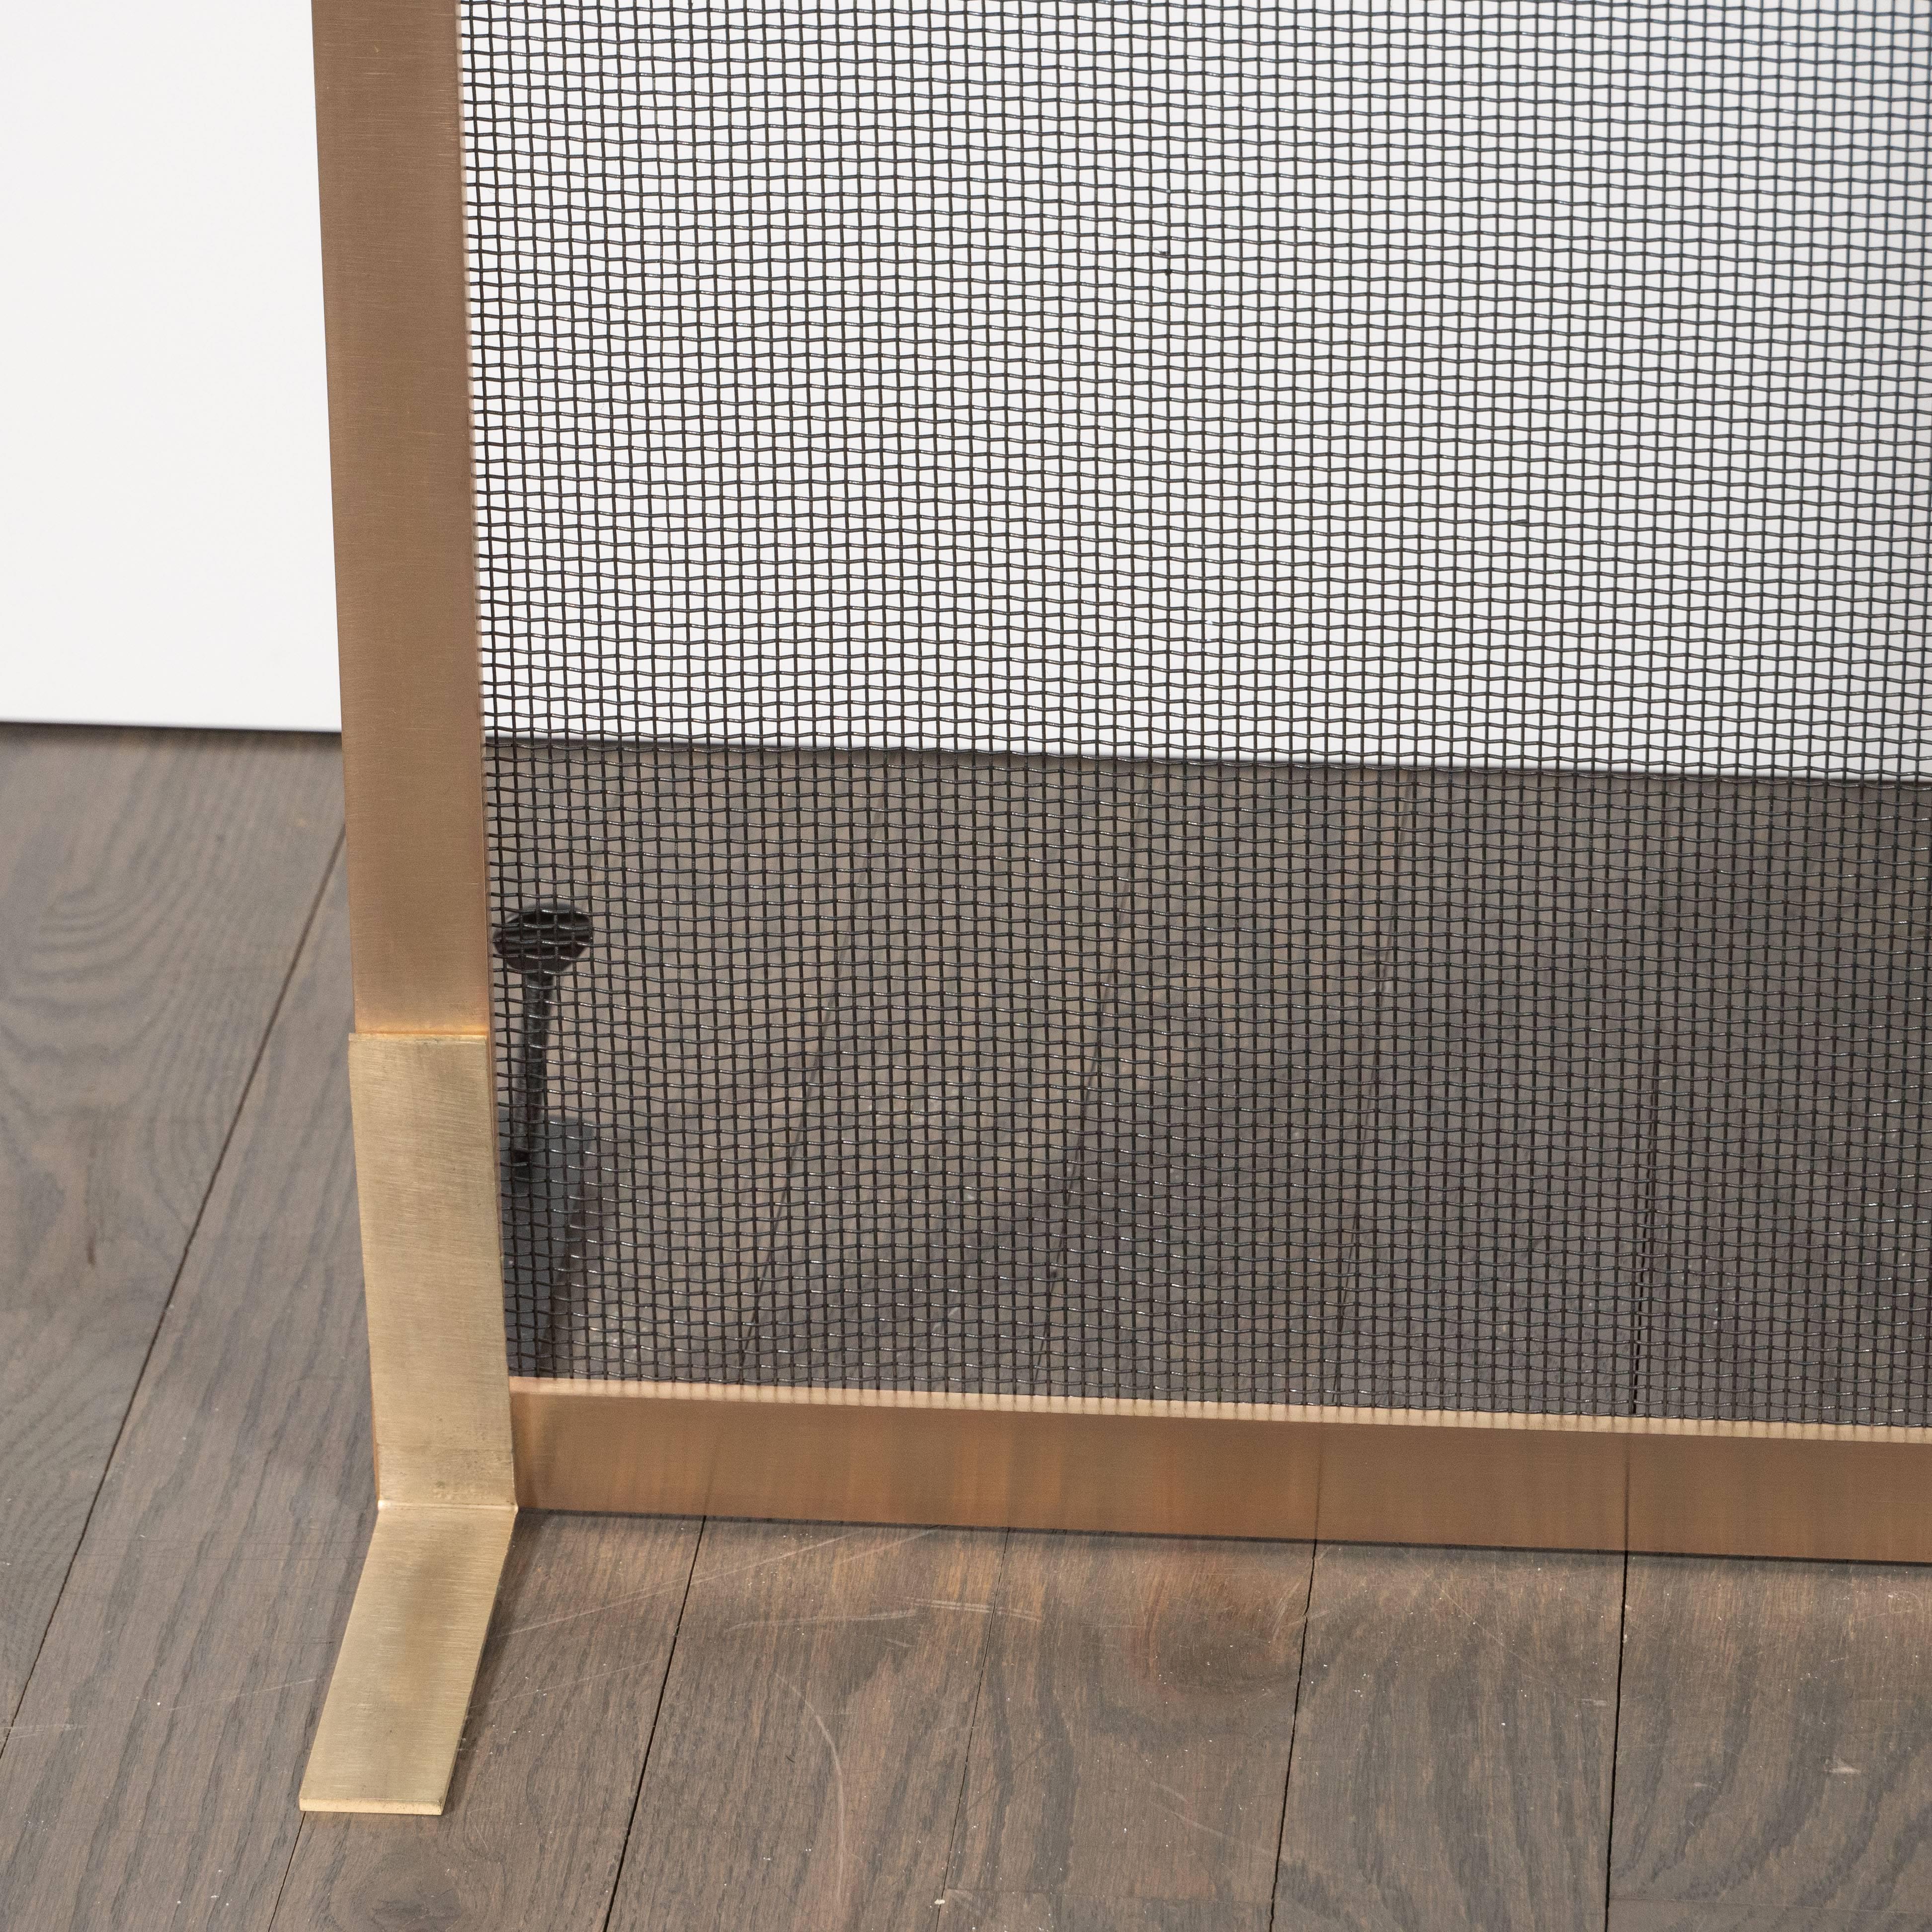 This stunning modernist fire screen was custom made by artisans in New York State. It features an austere square body in brushed brass, with rectangular feet in the same material and a black iron mesh grill executed in a rectilinear weave. With its